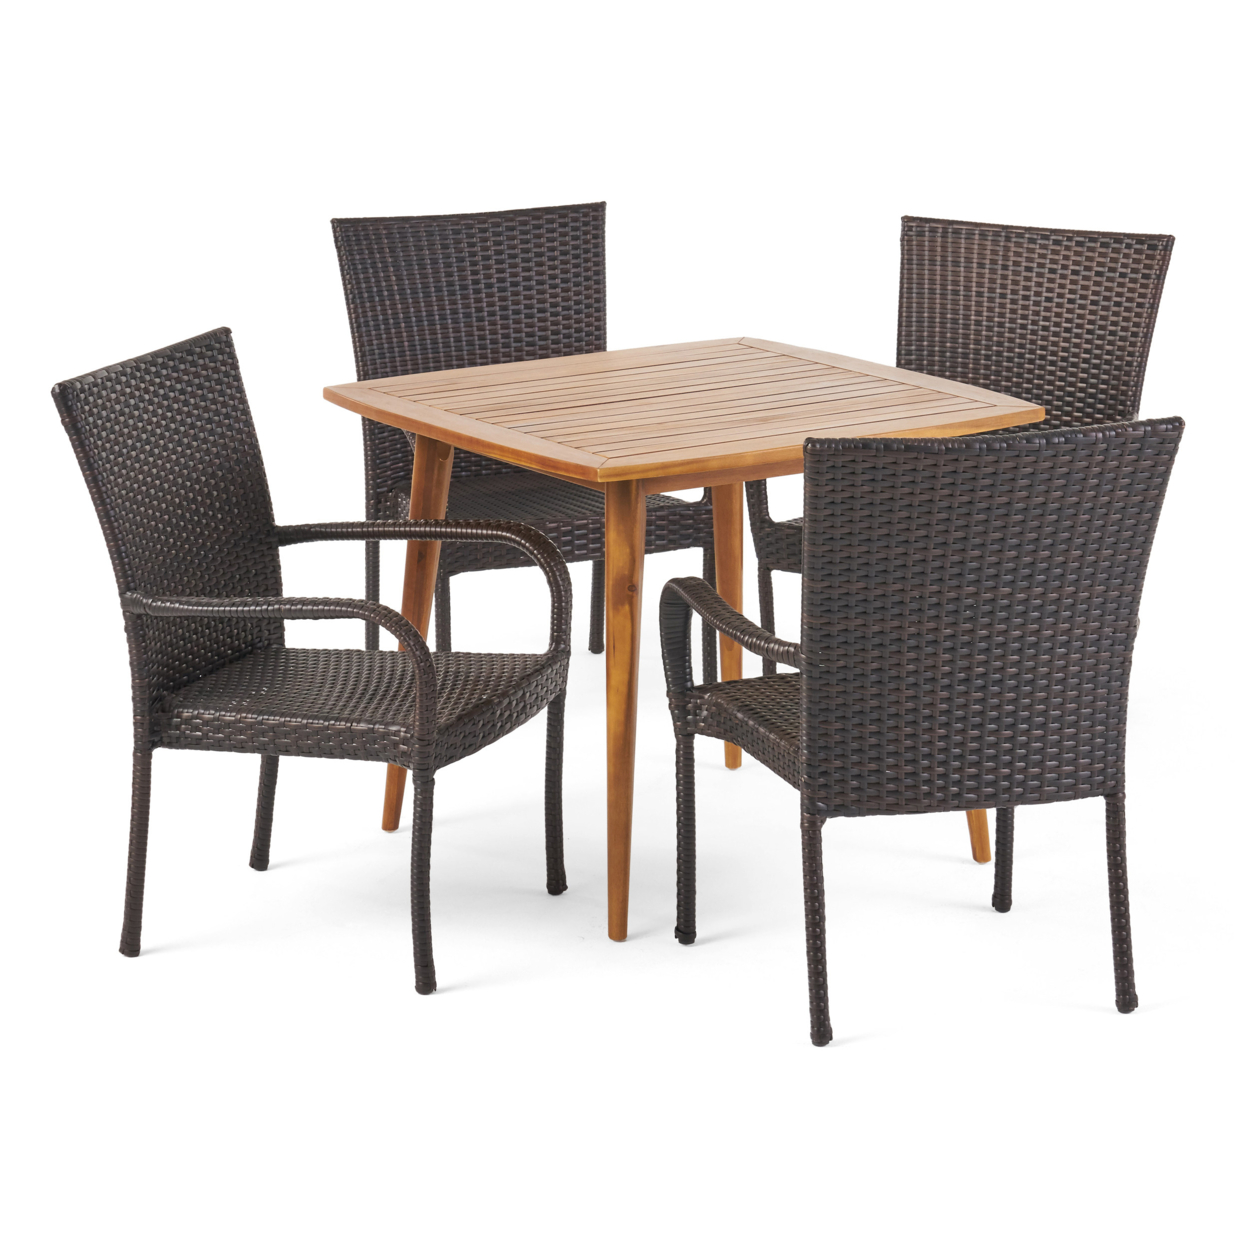 Marsh Outdoor 5 Piece Wood And Wicker Dining Set, Teak And Multi Brown